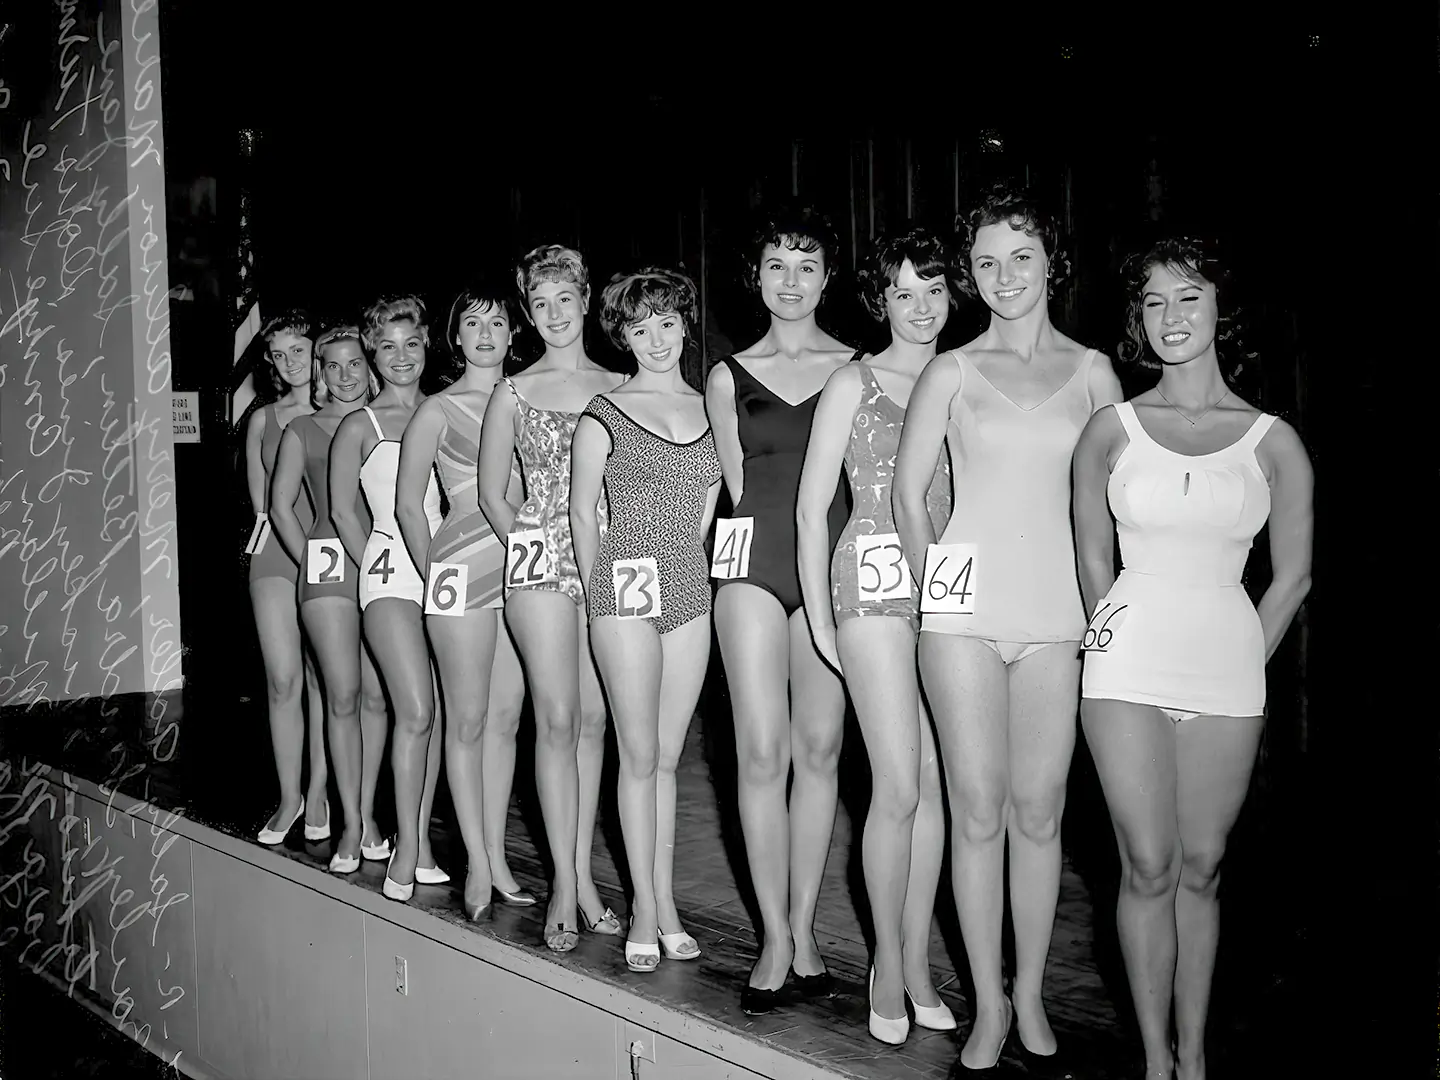 Vintage Vaudeville porn videos with ten beautiful women in sexy vintage swimming suits posing on a vaudeville scene